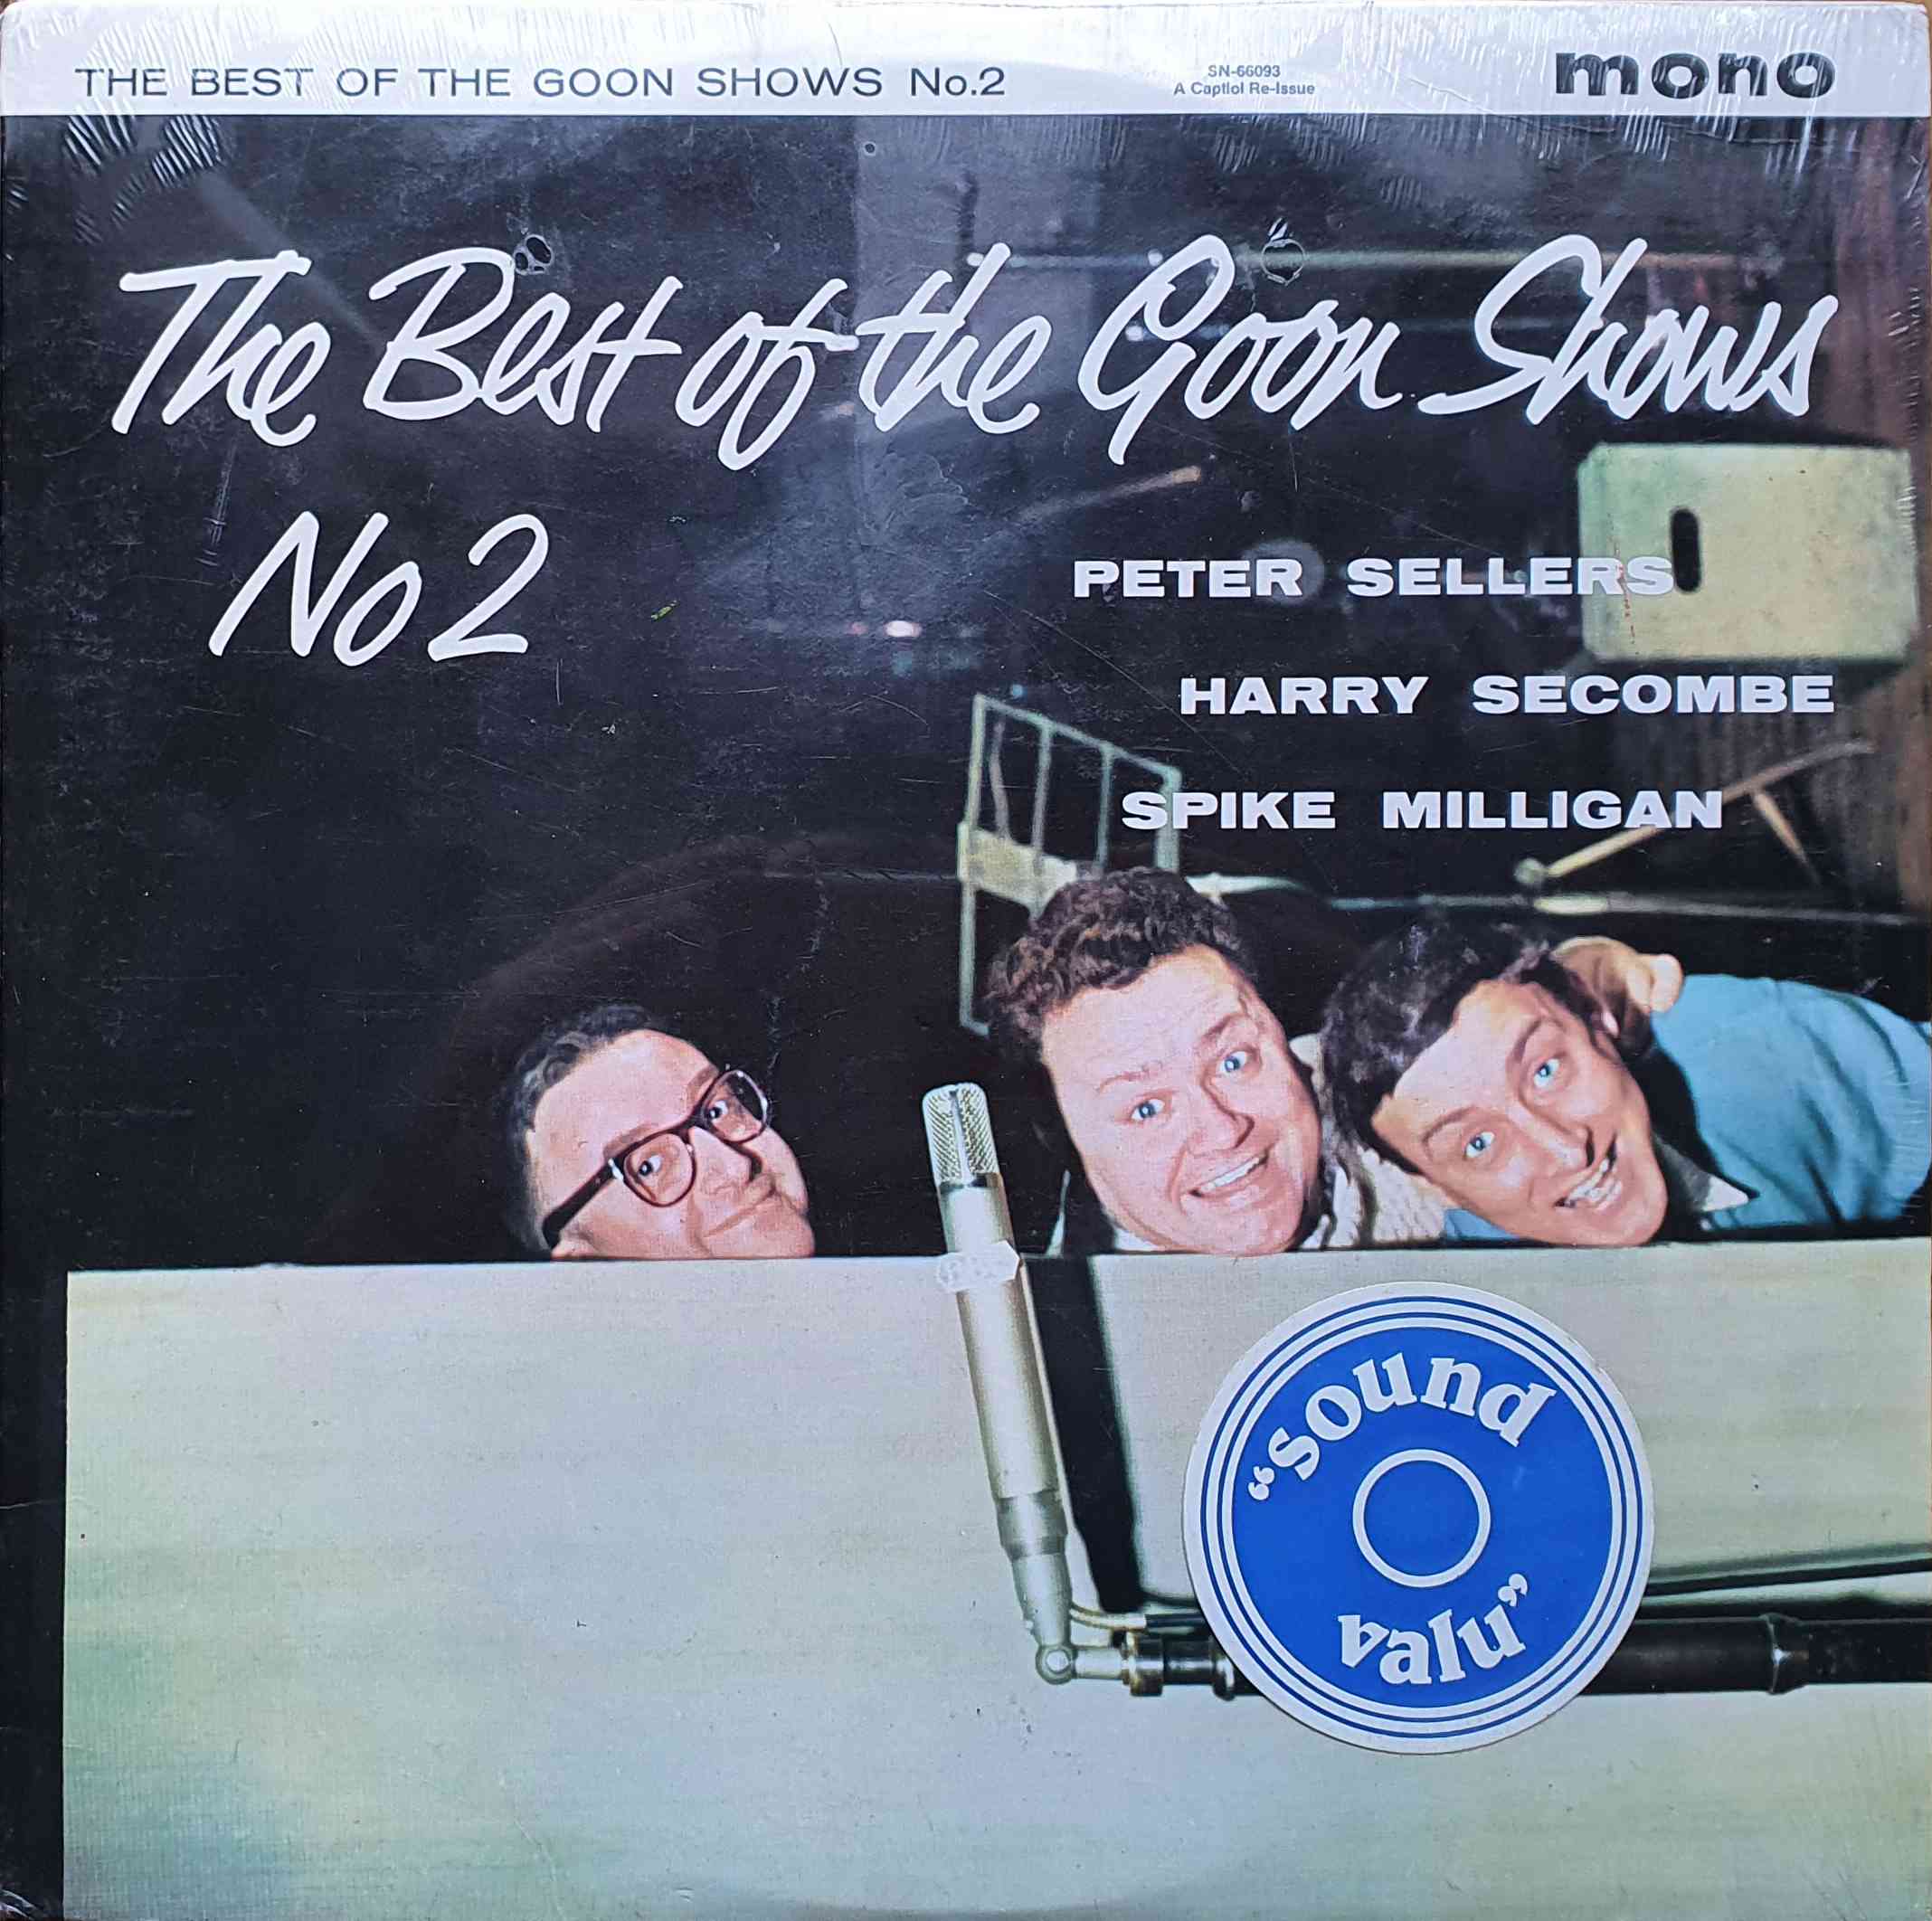 Picture of The best of the Goon shows No 2 by artist Spike Milligan / Peter Sellers / Harry Secombe from the BBC albums - Records and Tapes library